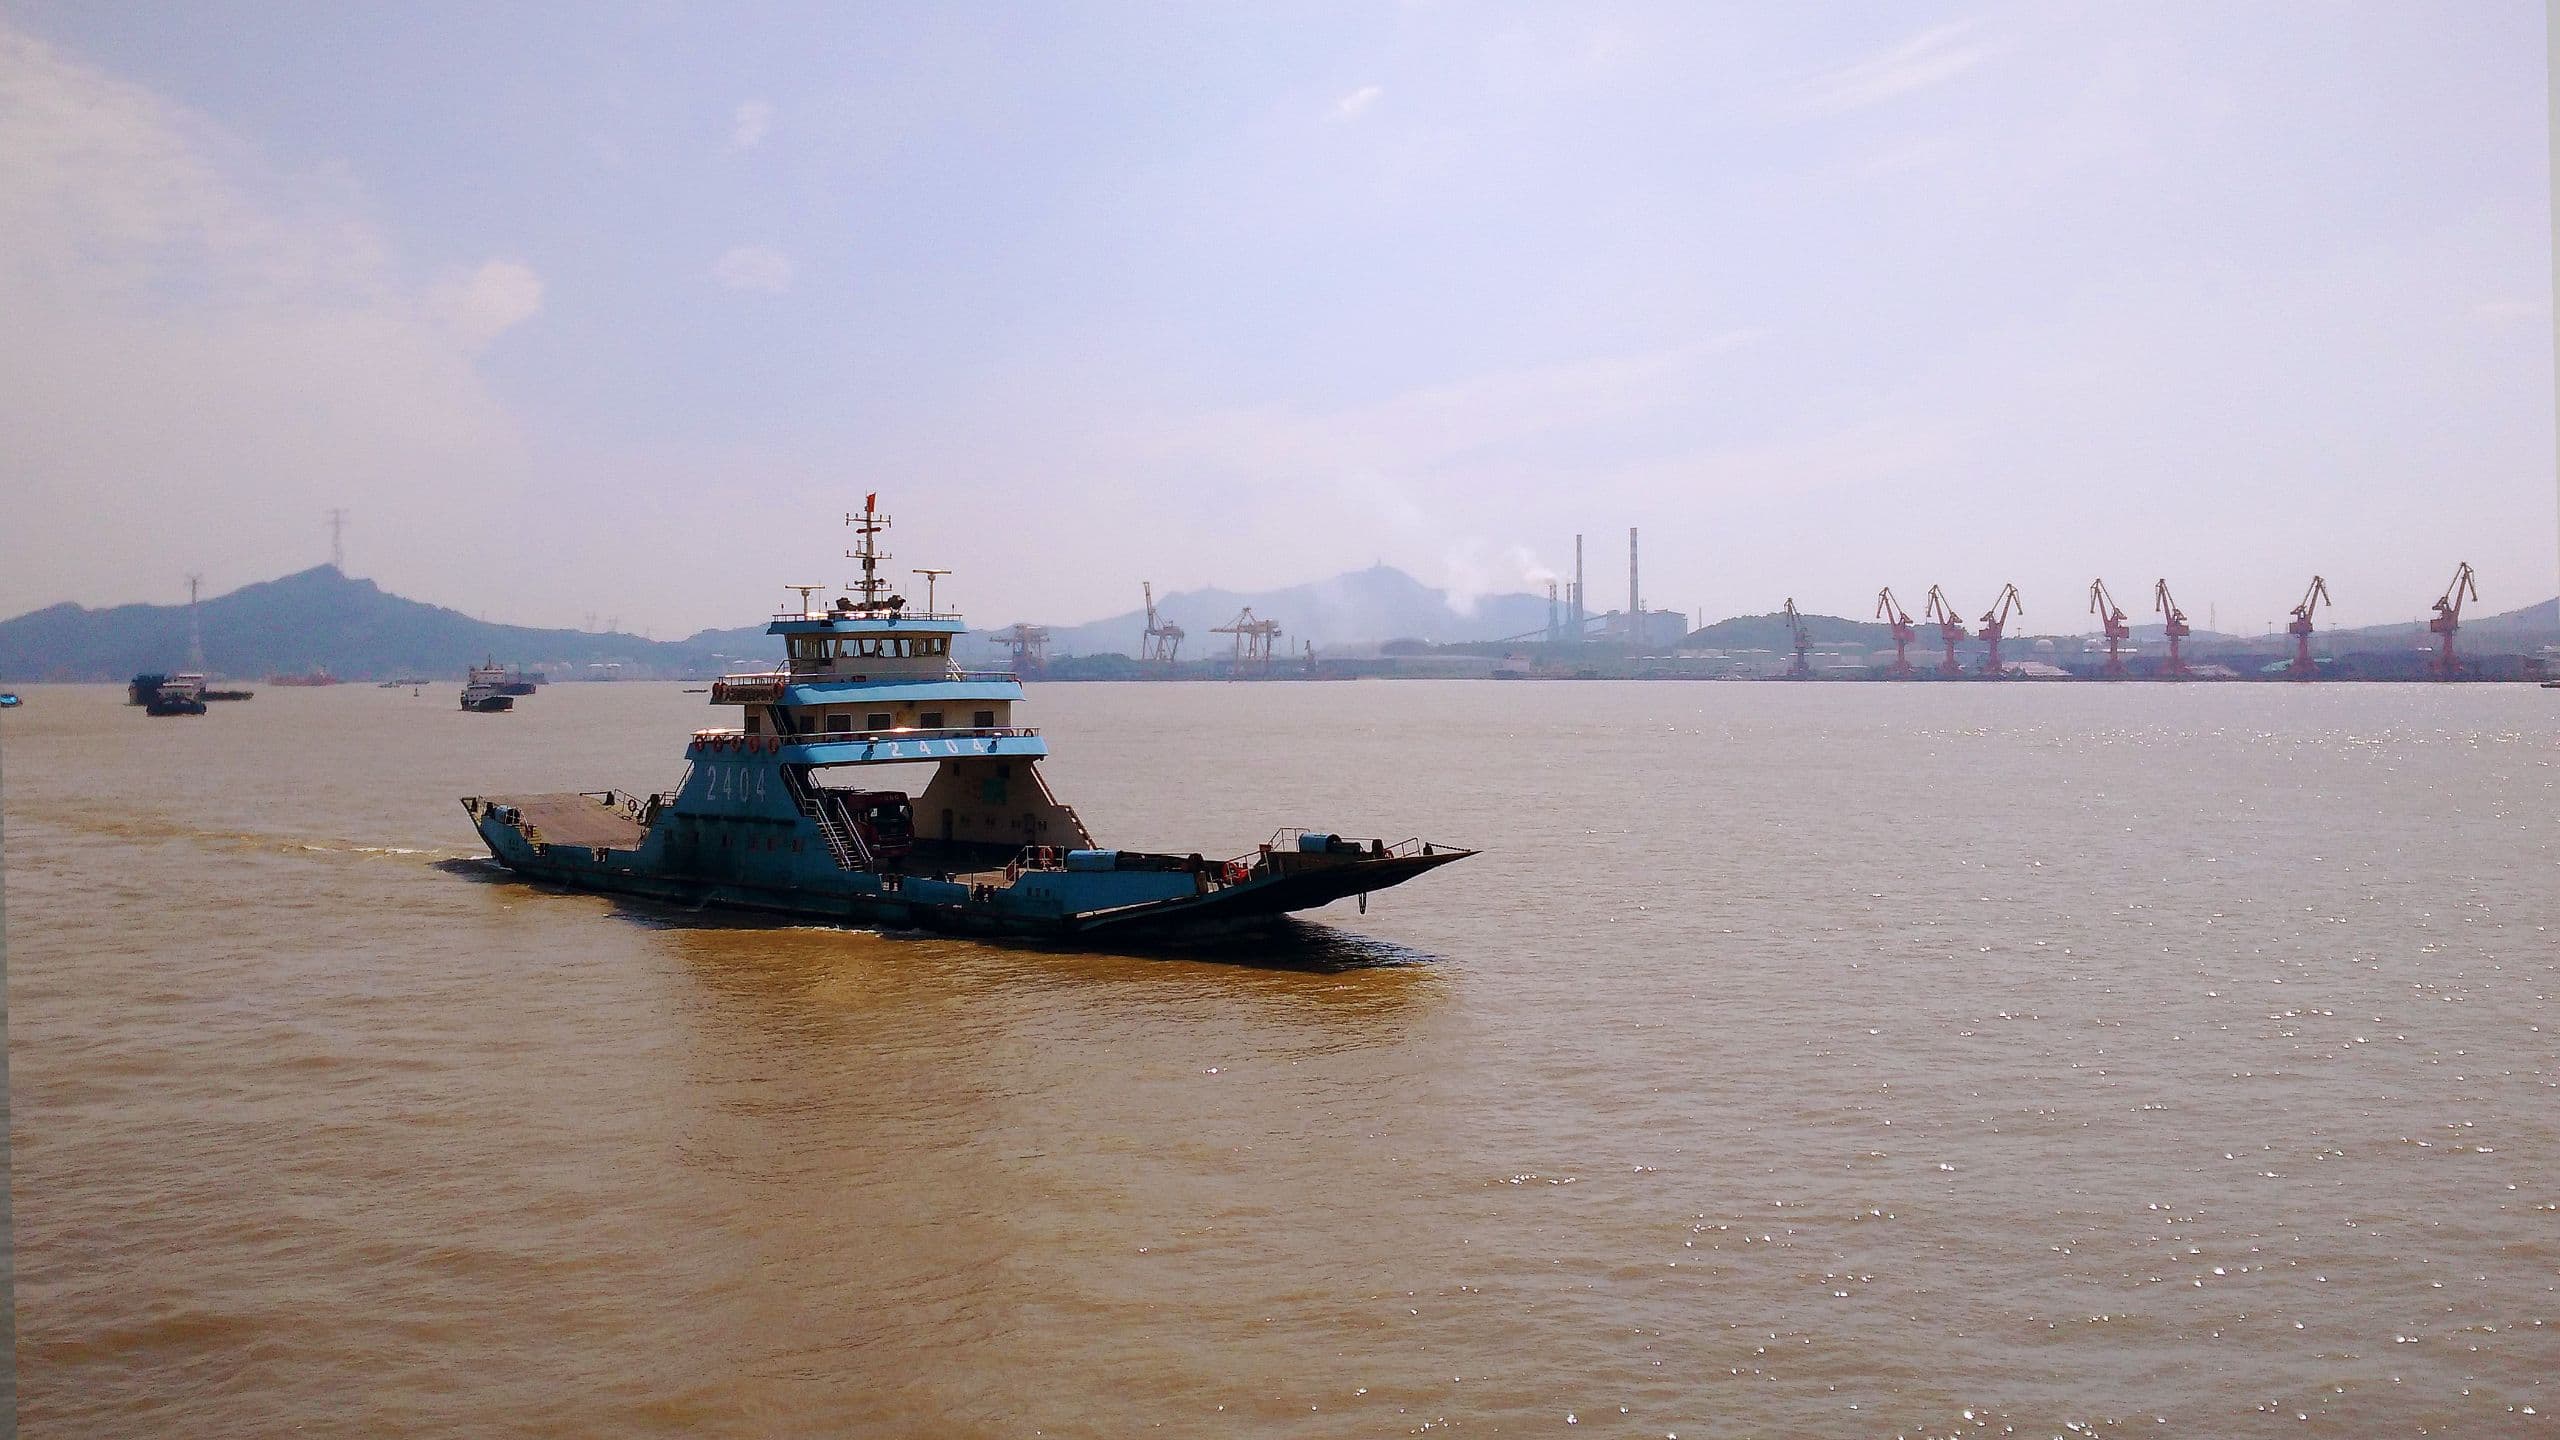 A ferry boat on the Yangtze river